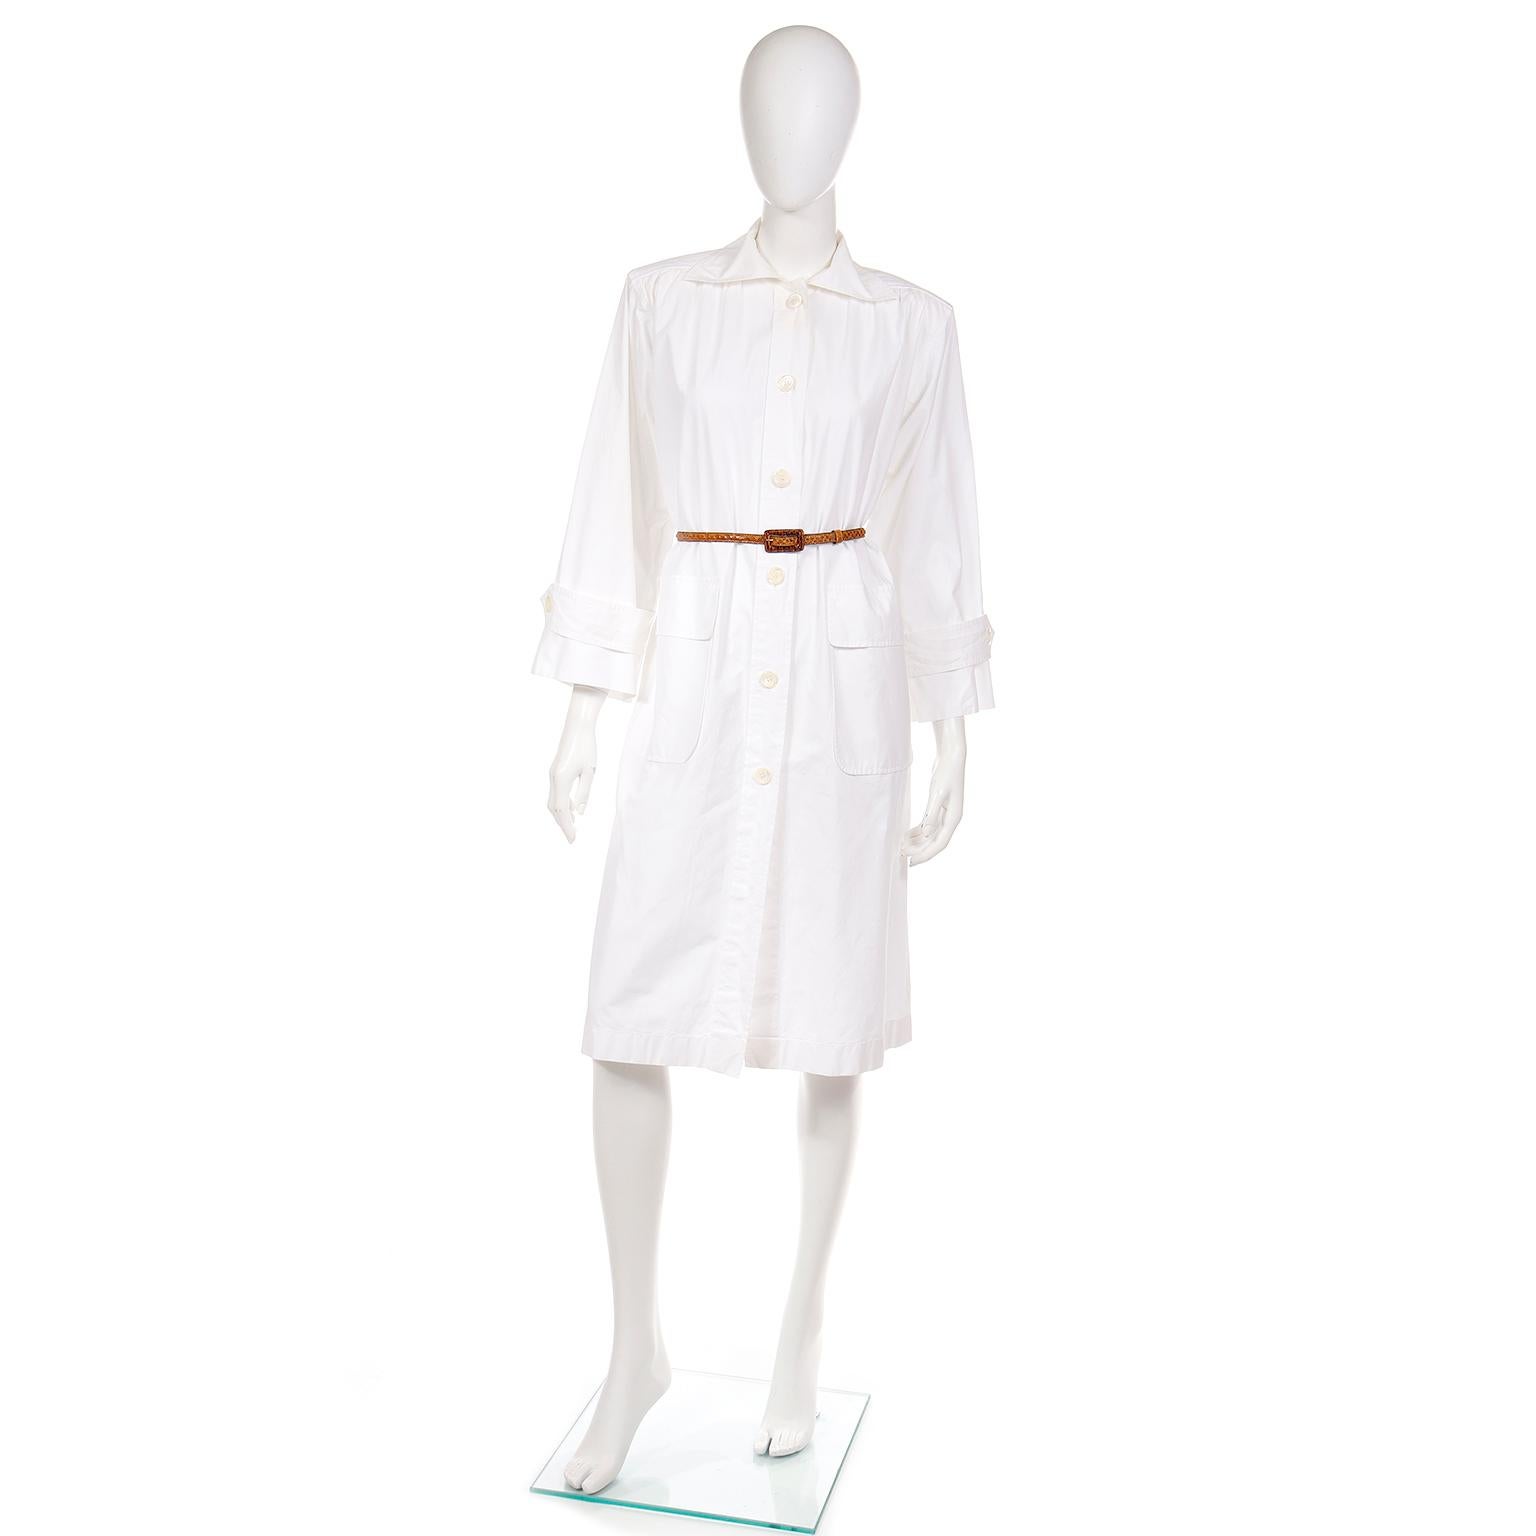 This vintage early 1980's Yves Saint Laurent white cotton duster style coat or coat dress is another YSL take on the utilitarian smock style dresses and tops he designed in the 1970's.
This easy to wear coat or coat dress has cream button closures